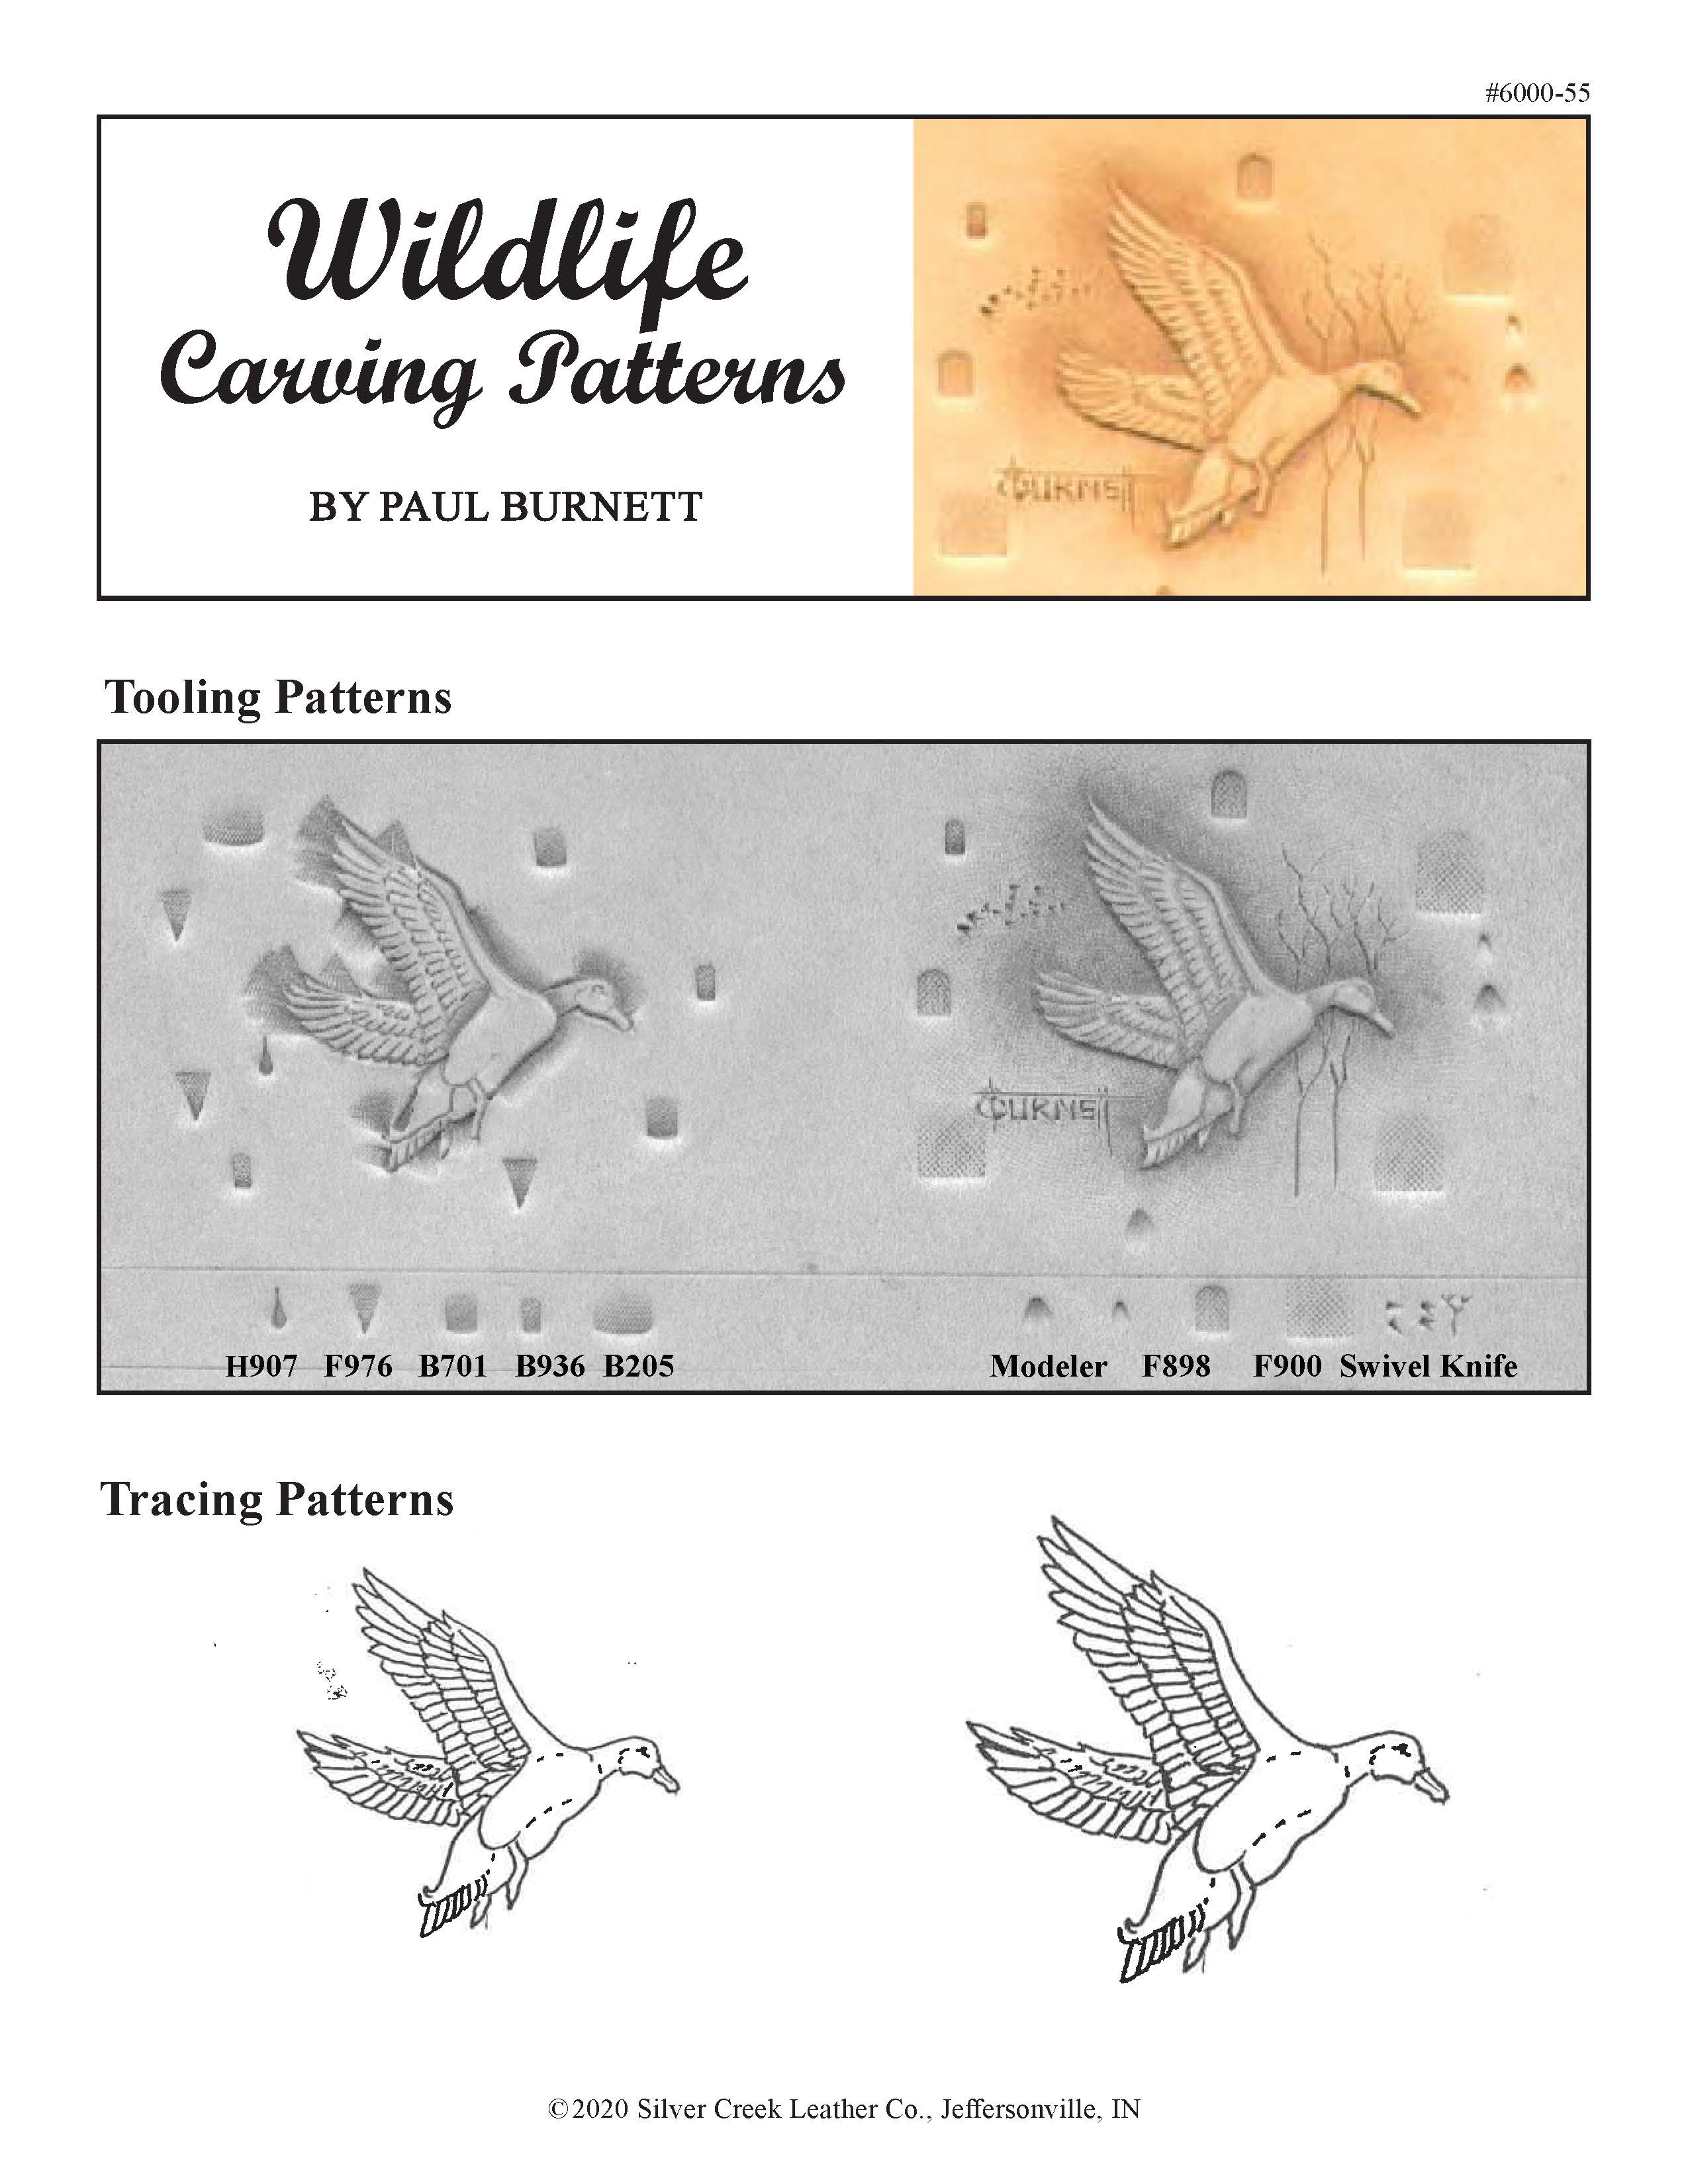 Bird Tooling and Carving Patterns by Paul Burnett – Shop Realeather